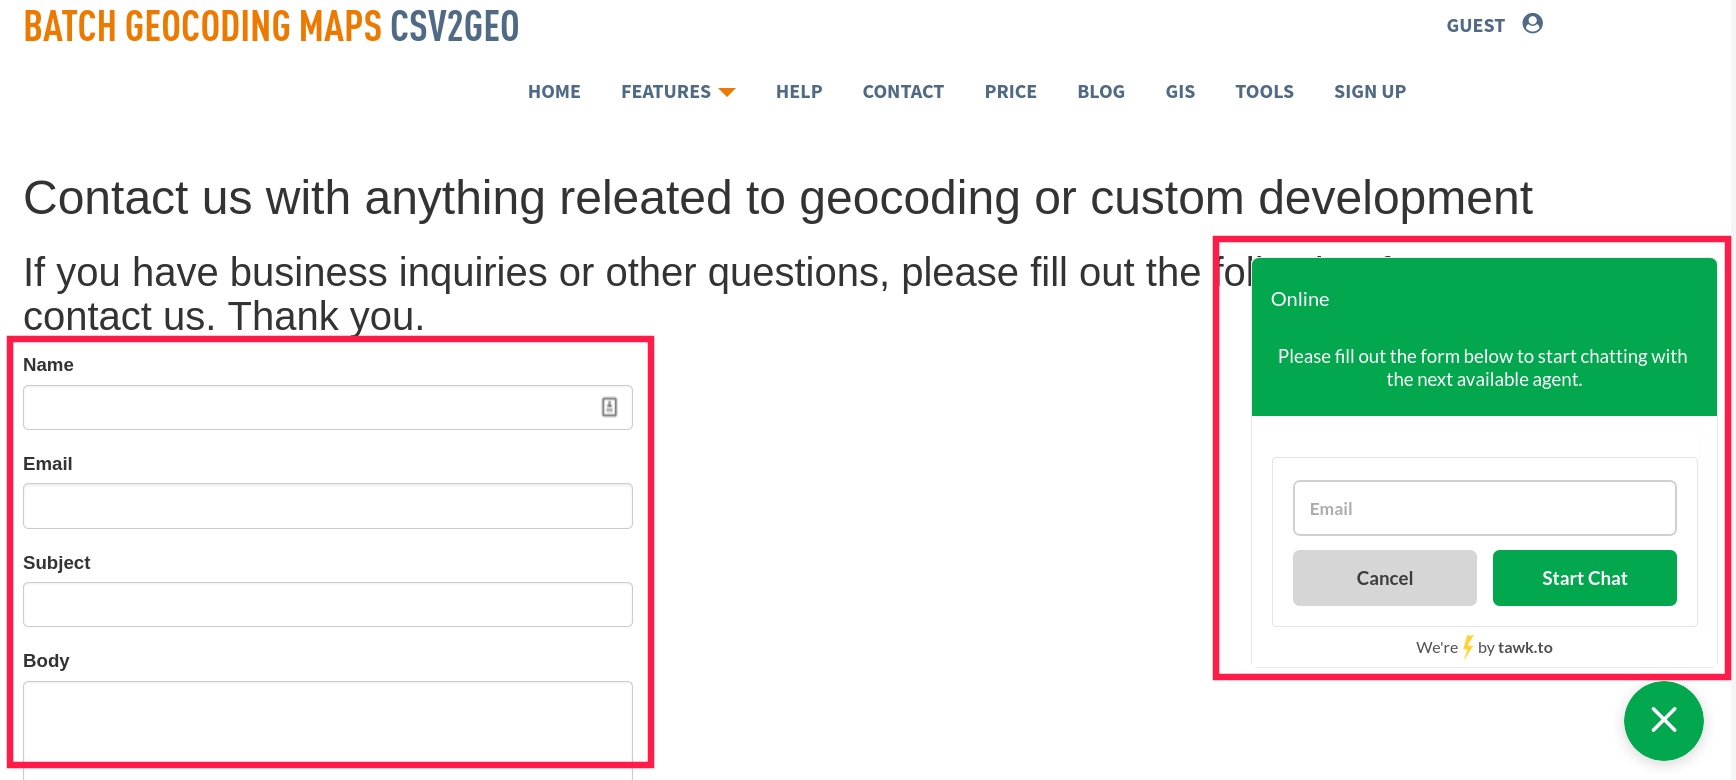 contact us with anything relaetd to geocoding 